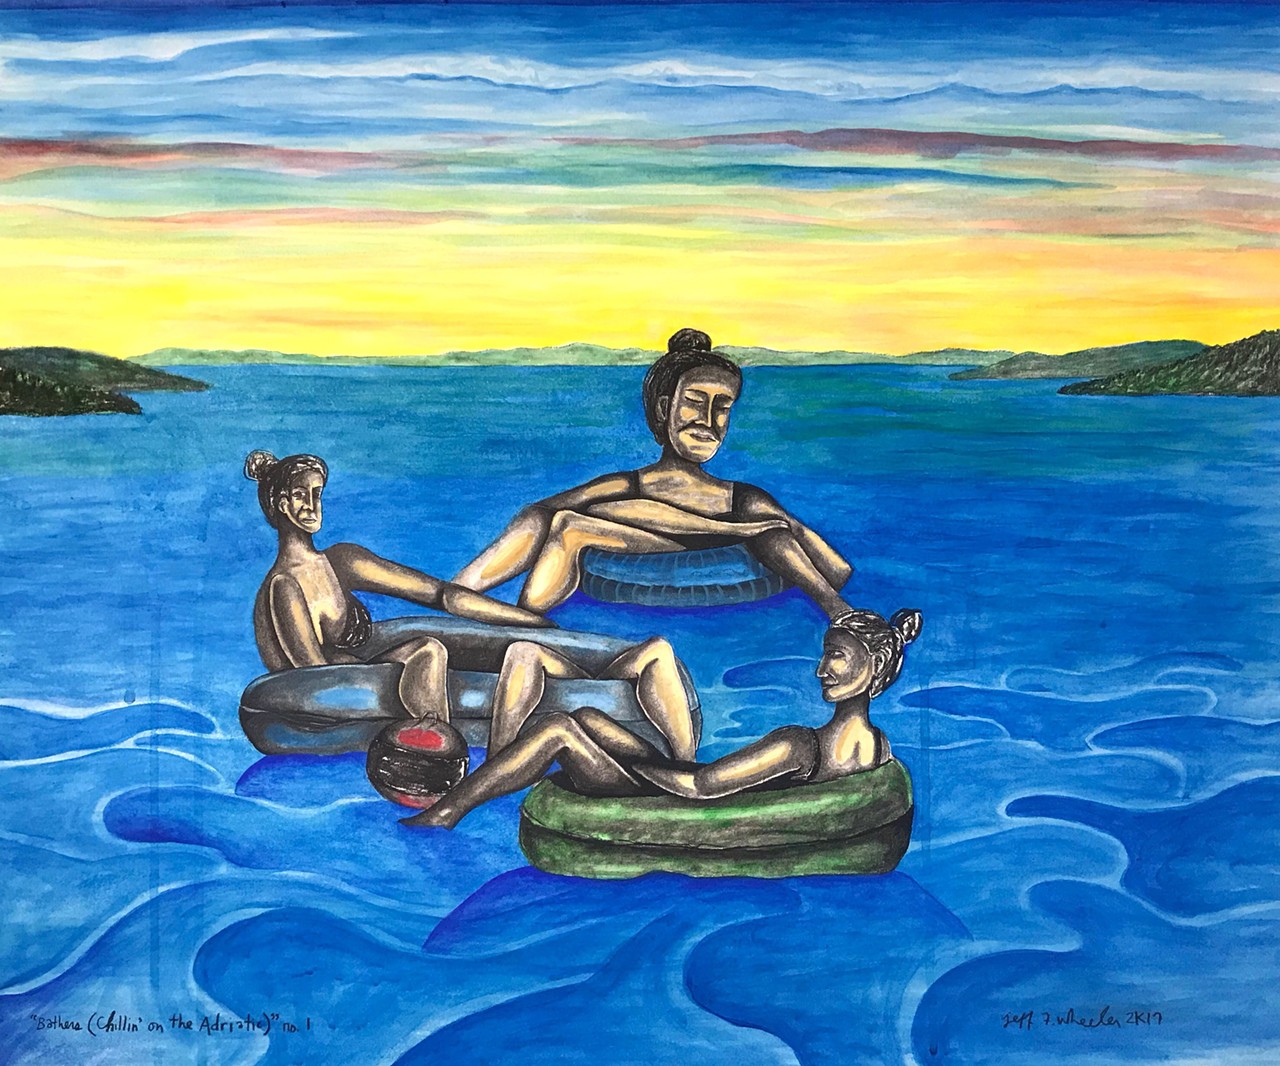 “BATHERS (Chillin’ on the Adriatic),” acrylic and charcoal on paper, 24” x 36”, $900